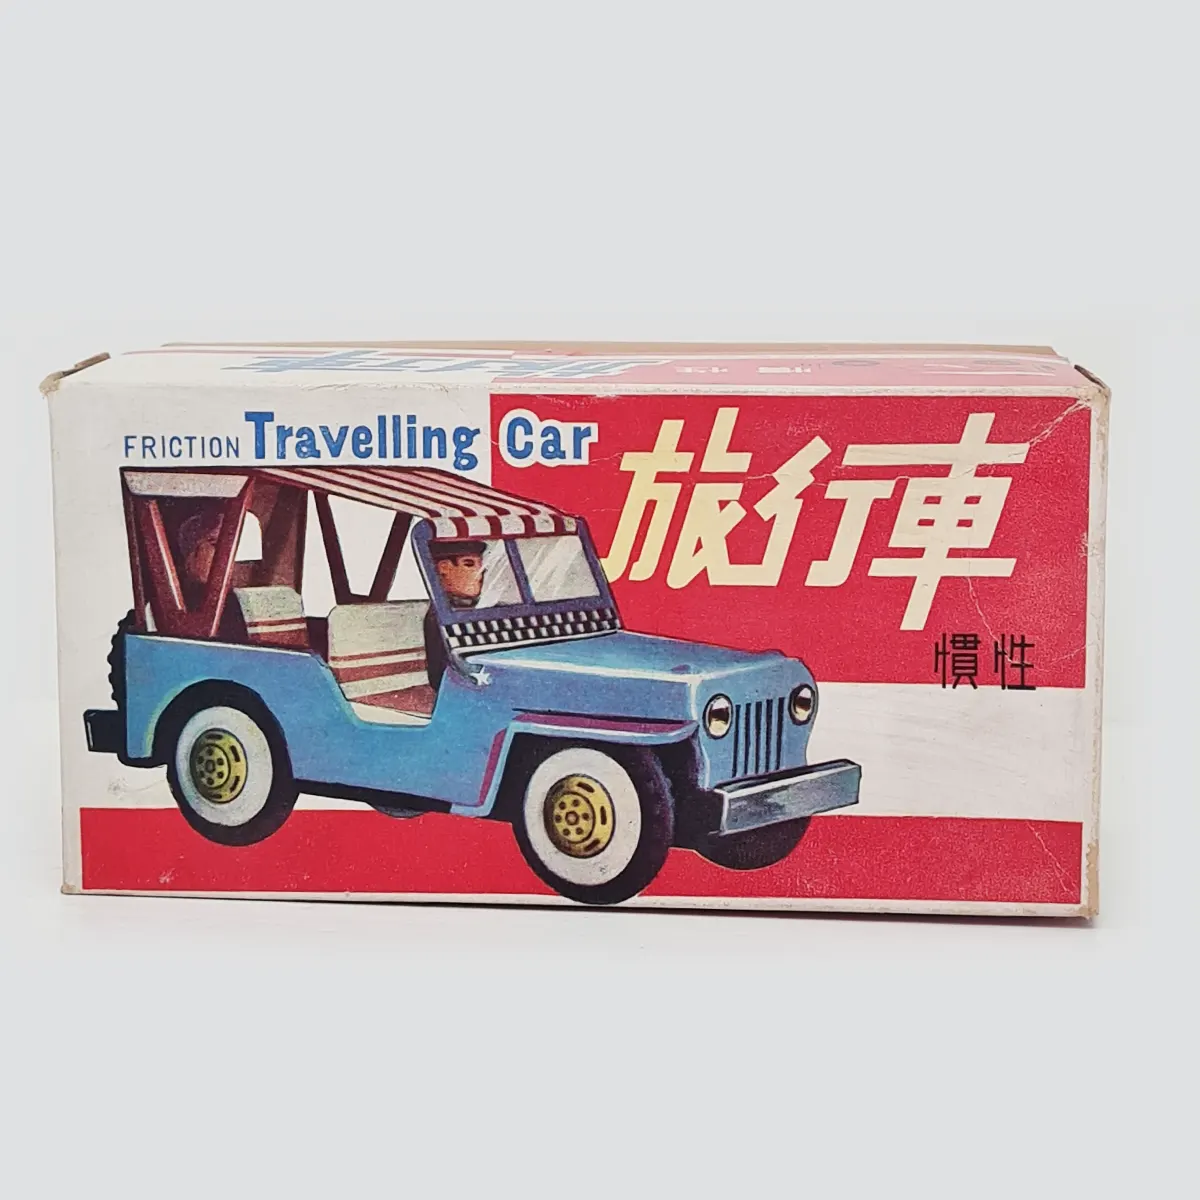 Friction Travelling Car